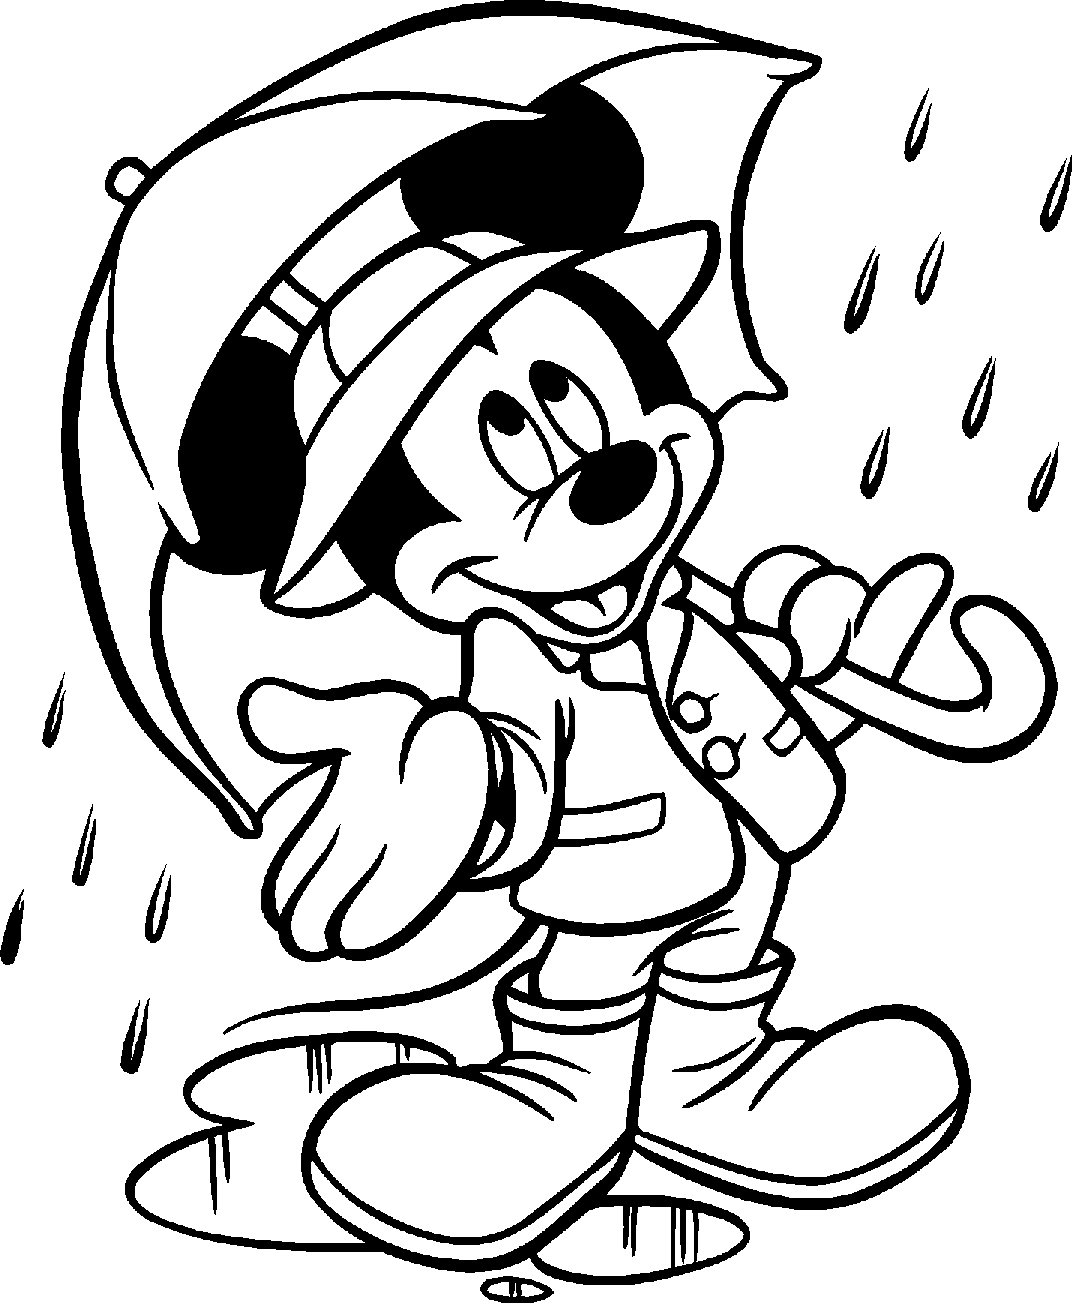 Mickey Mouse Coloring Pages Printable - Customize and Print